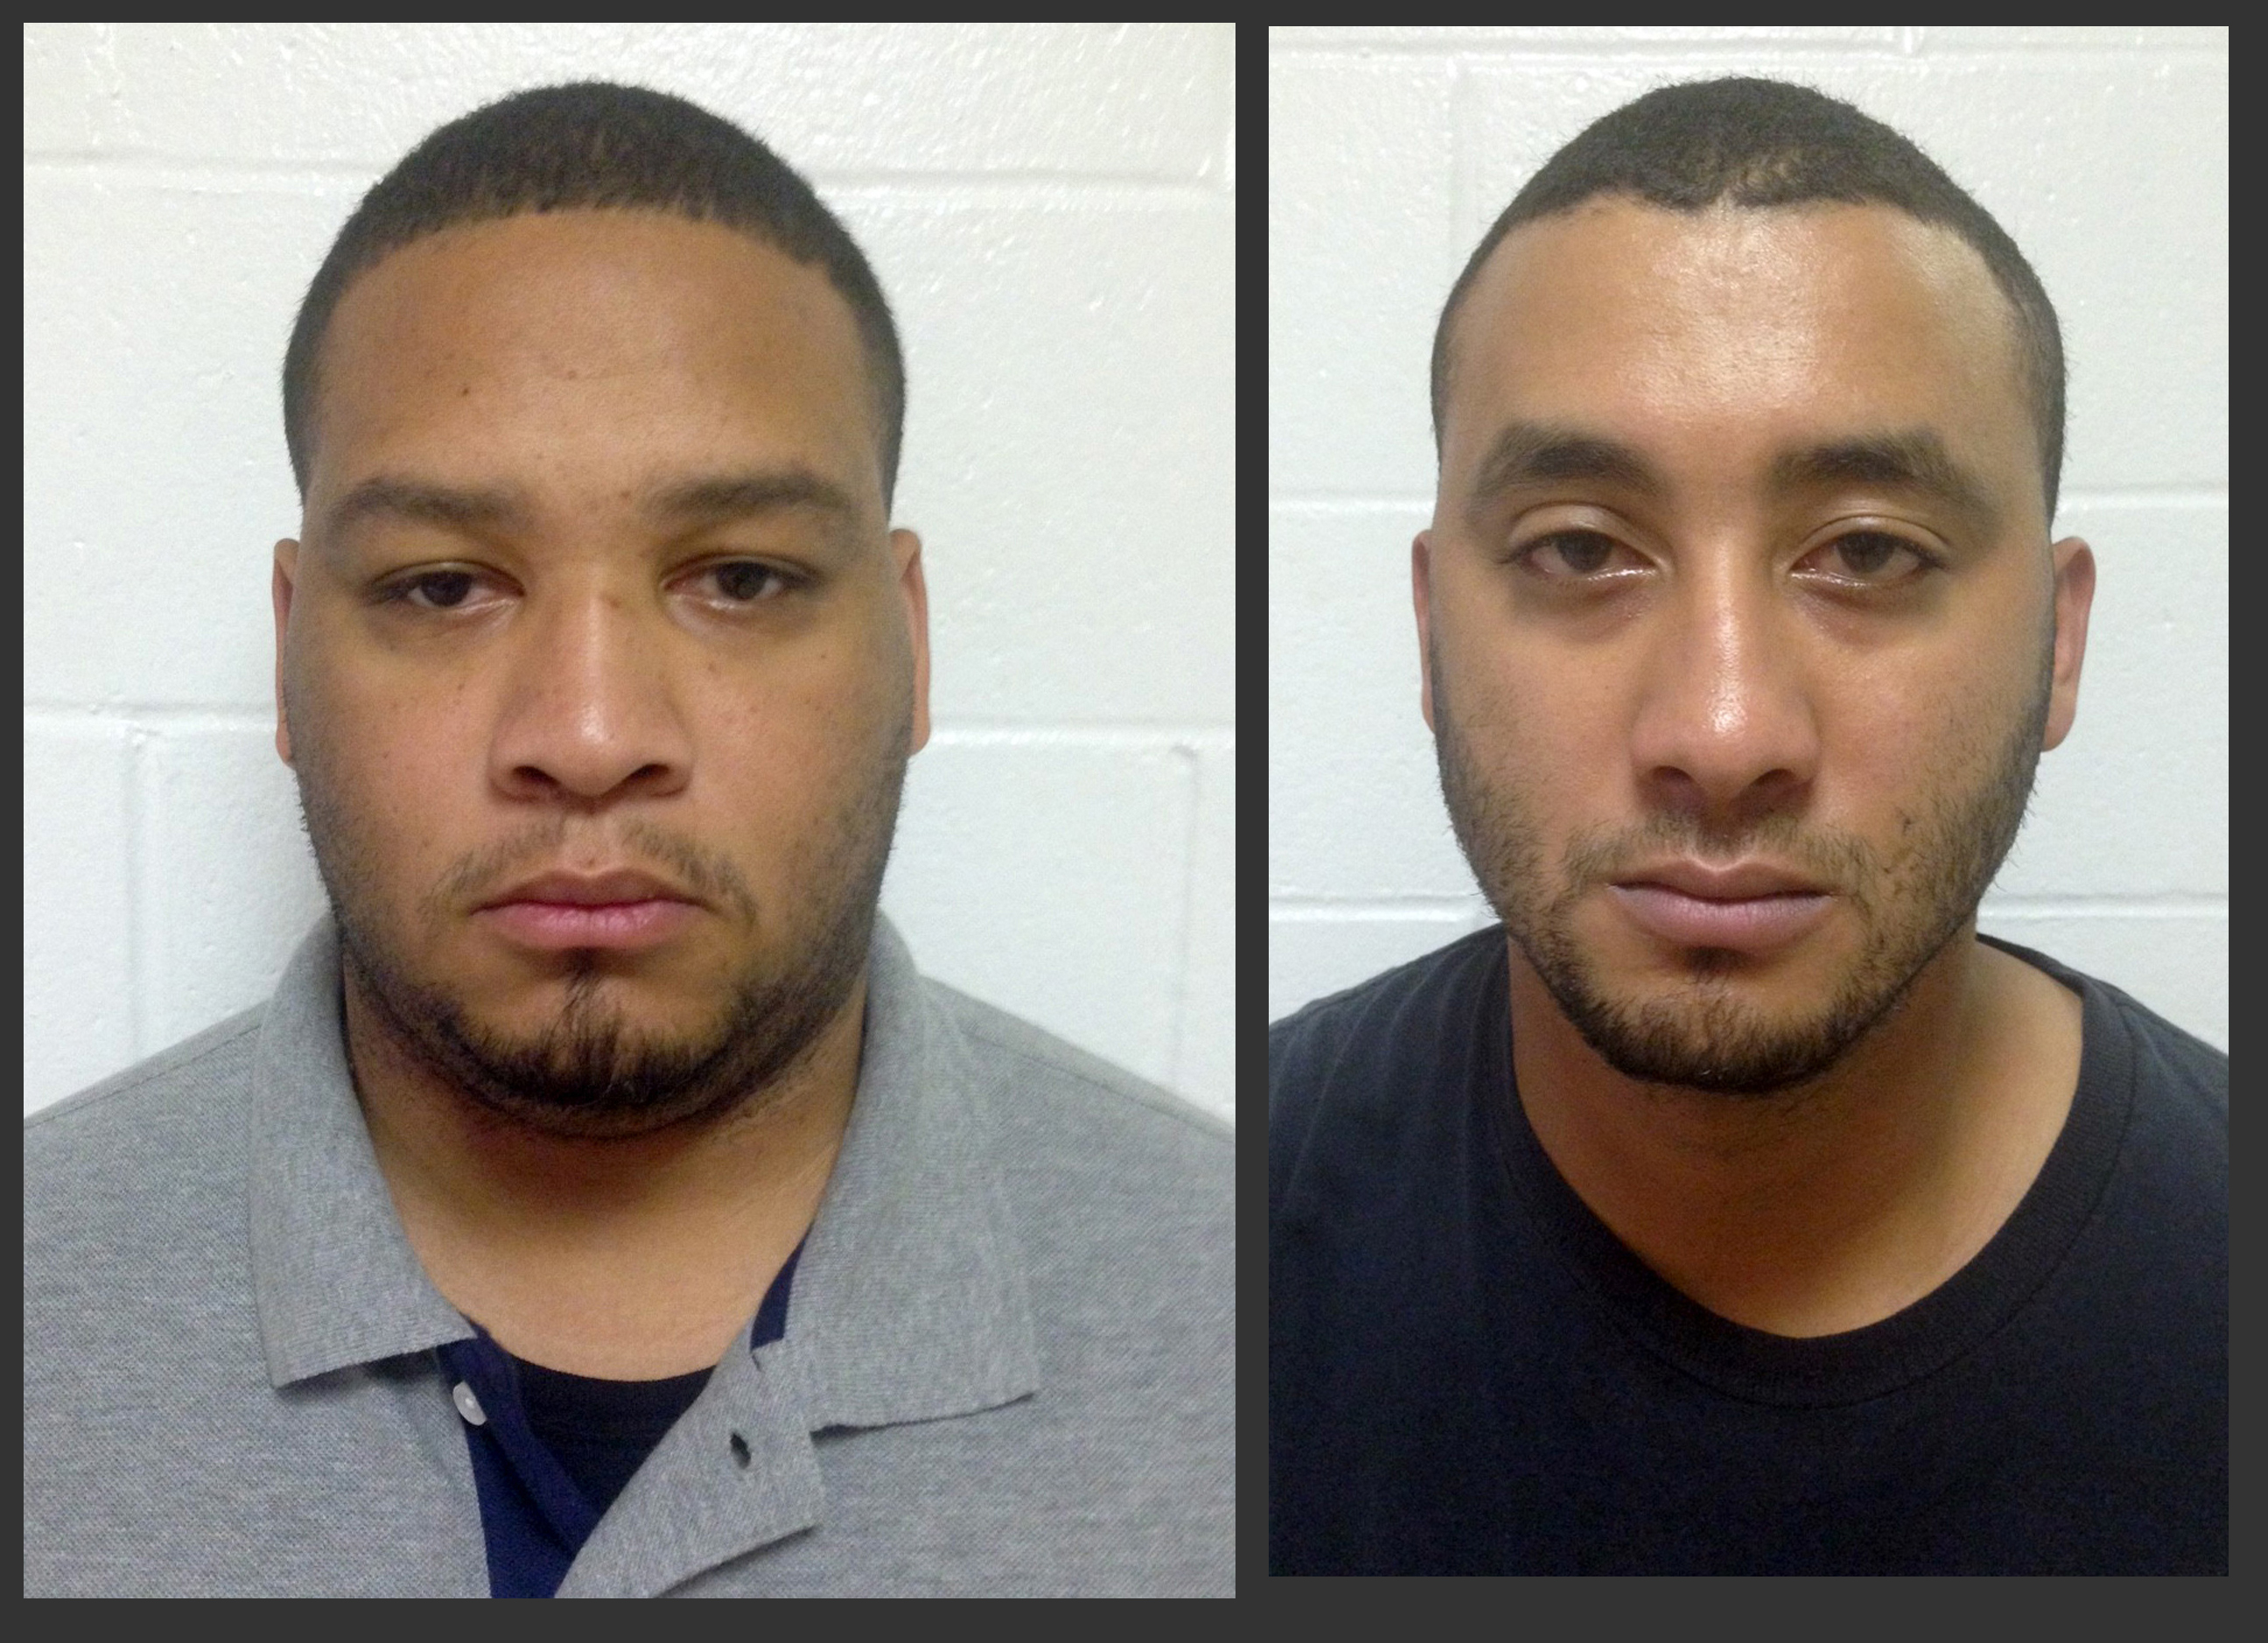 Marksville City Marshal Derrick Stafford, left, and Marksville City Marshal Norris Greenhouse Jr. were arrested on charges of second-degree murder and attempted second-degree murder in the Nov. 3, 2015 in Marksville, La. (Louisiana State Police/AP)